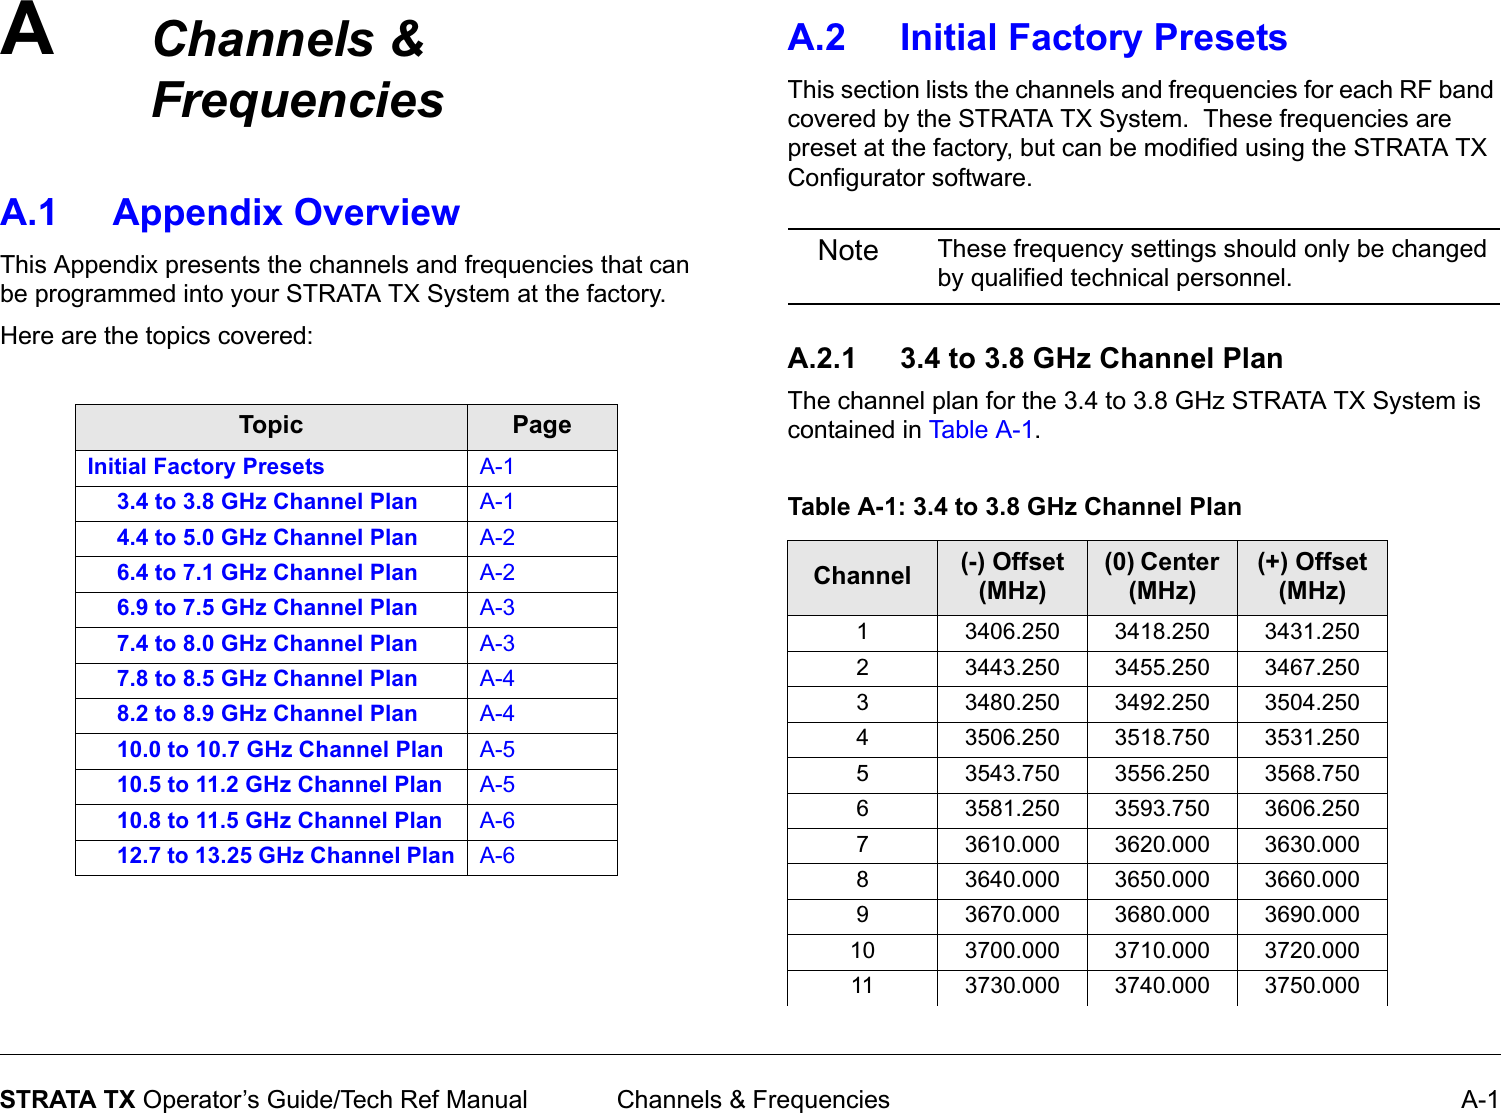 A Channels &amp; Frequencies A-1STRATA TX Operator’s Guide/Tech Ref ManualChannels &amp; Frequencies A.1 Appendix OverviewThis Appendix presents the channels and frequencies that can be programmed into your STRATA TX System at the factory.Here are the topics covered:Topic PageInitial Factory Presets A-13.4 to 3.8 GHz Channel Plan A-14.4 to 5.0 GHz Channel Plan A-26.4 to 7.1 GHz Channel Plan A-26.9 to 7.5 GHz Channel Plan A-37.4 to 8.0 GHz Channel Plan A-37.8 to 8.5 GHz Channel Plan A-48.2 to 8.9 GHz Channel Plan A-410.0 to 10.7 GHz Channel Plan A-510.5 to 11.2 GHz Channel Plan A-510.8 to 11.5 GHz Channel Plan A-612.7 to 13.25 GHz Channel Plan A-6A.2 Initial Factory PresetsThis section lists the channels and frequencies for each RF band covered by the STRATA TX System.  These frequencies are preset at the factory, but can be modified using the STRATA TX Configurator software.Note  These frequency settings should only be changed by qualified technical personnel.A.2.1 3.4 to 3.8 GHz Channel PlanThe channel plan for the 3.4 to 3.8 GHz STRATA TX System is contained in Tab l e  A - 1.Table A-1: 3.4 to 3.8 GHz Channel PlanChannel (-) Offset (MHz)(0) Center (MHz)(+) Offset (MHz)1 3406.250 3418.250 3431.2502 3443.250 3455.250 3467.2503 3480.250 3492.250 3504.2504 3506.250 3518.750 3531.2505 3543.750 3556.250 3568.7506 3581.250 3593.750 3606.2507 3610.000 3620.000 3630.0008 3640.000 3650.000 3660.0009 3670.000 3680.000 3690.00010 3700.000 3710.000 3720.00011 3730.000 3740.000 3750.000